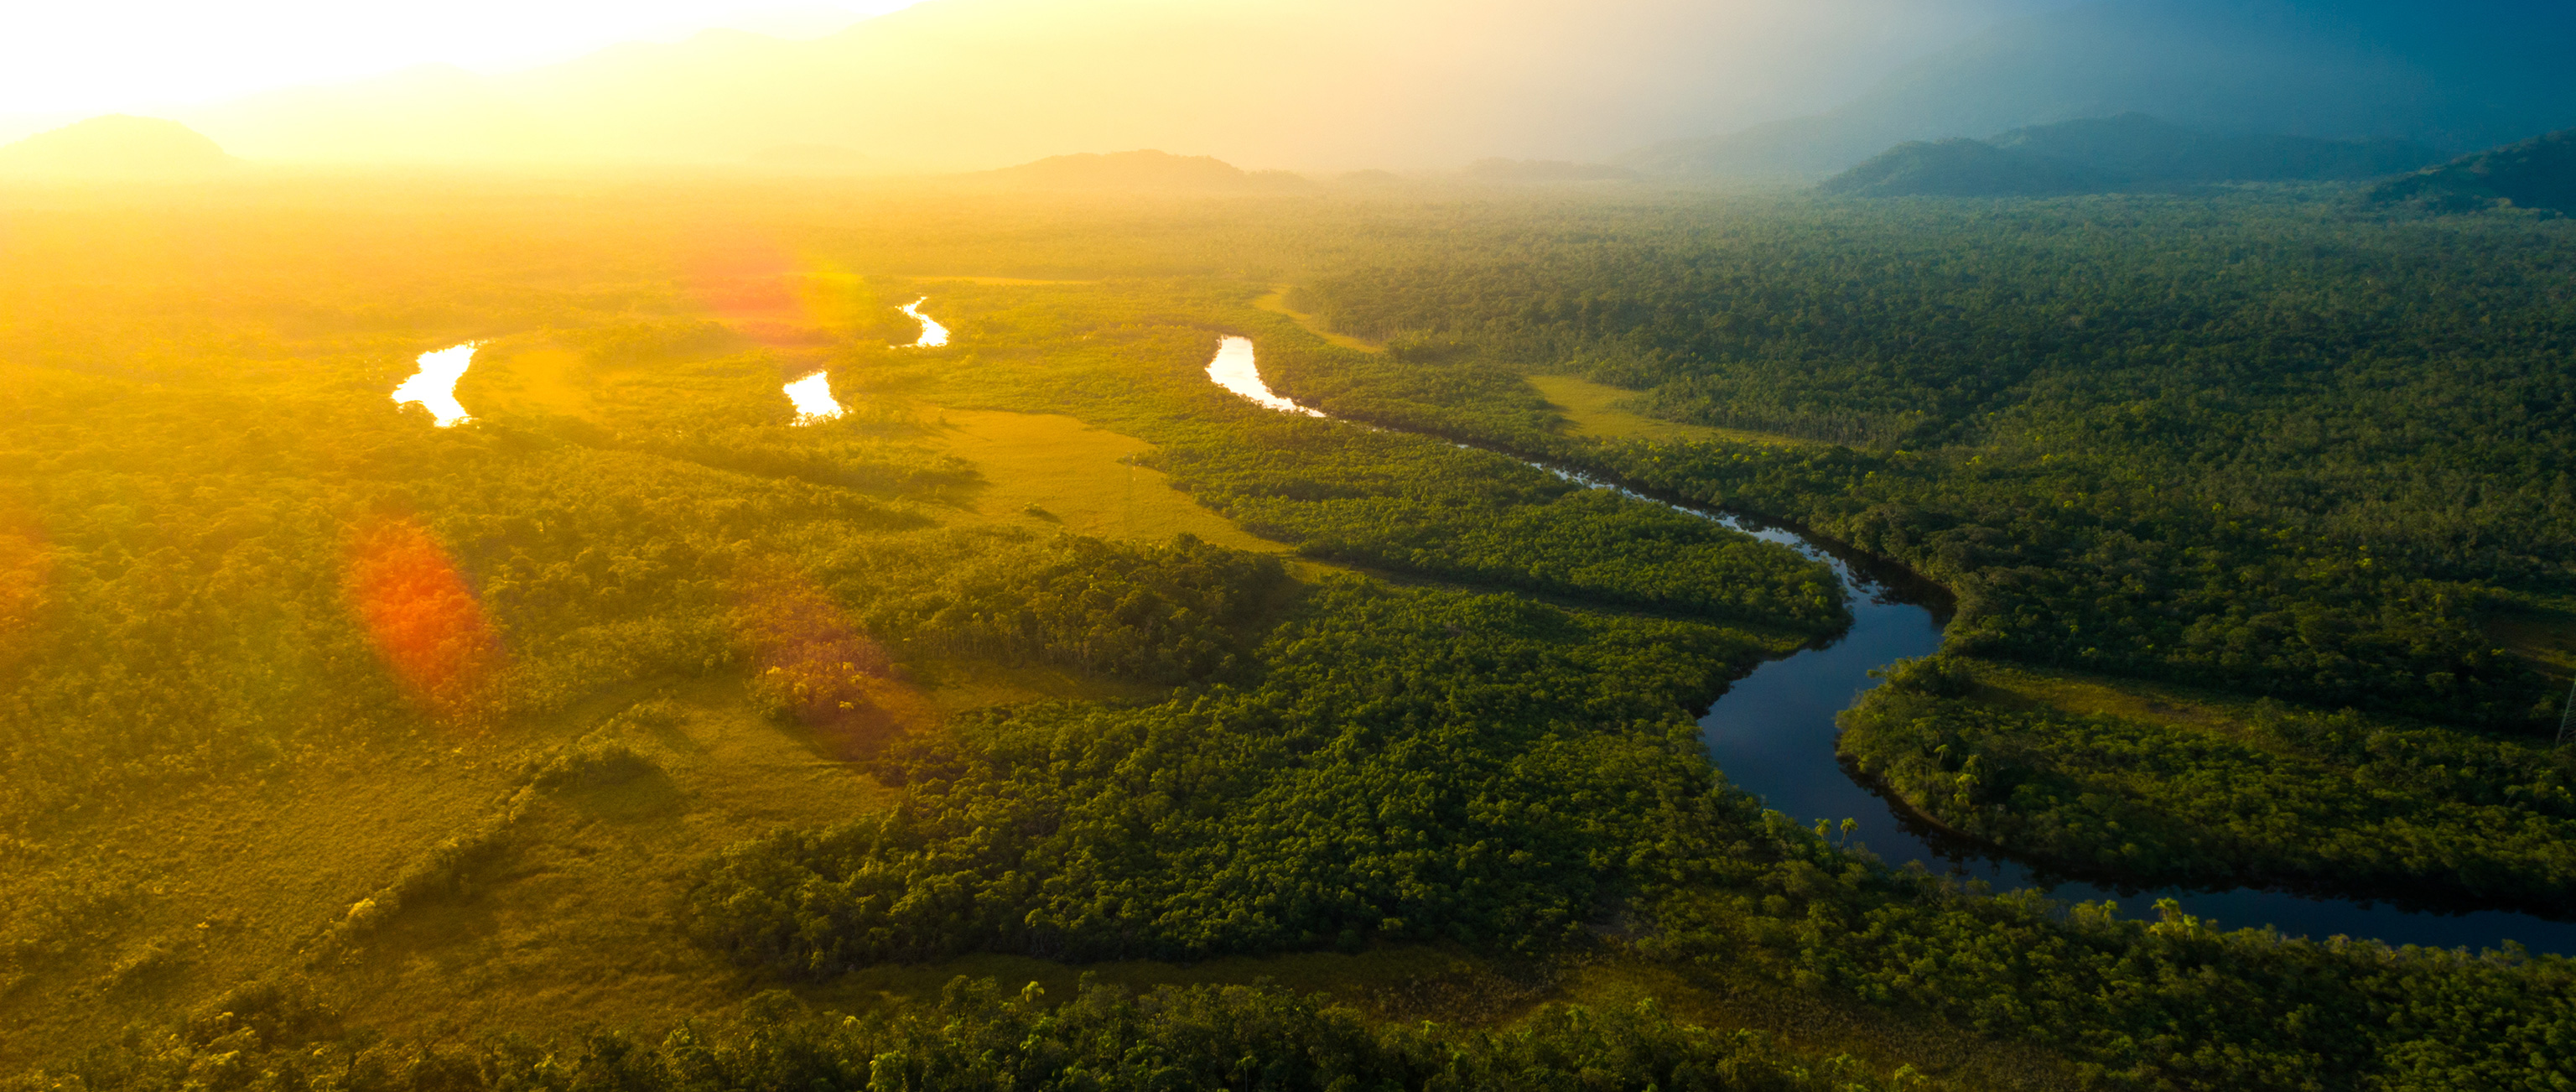 How Amazon Conservation Team Approaches COVID-19 Response With Vulnerable Indigenous Communities During the Worsening Pandemic